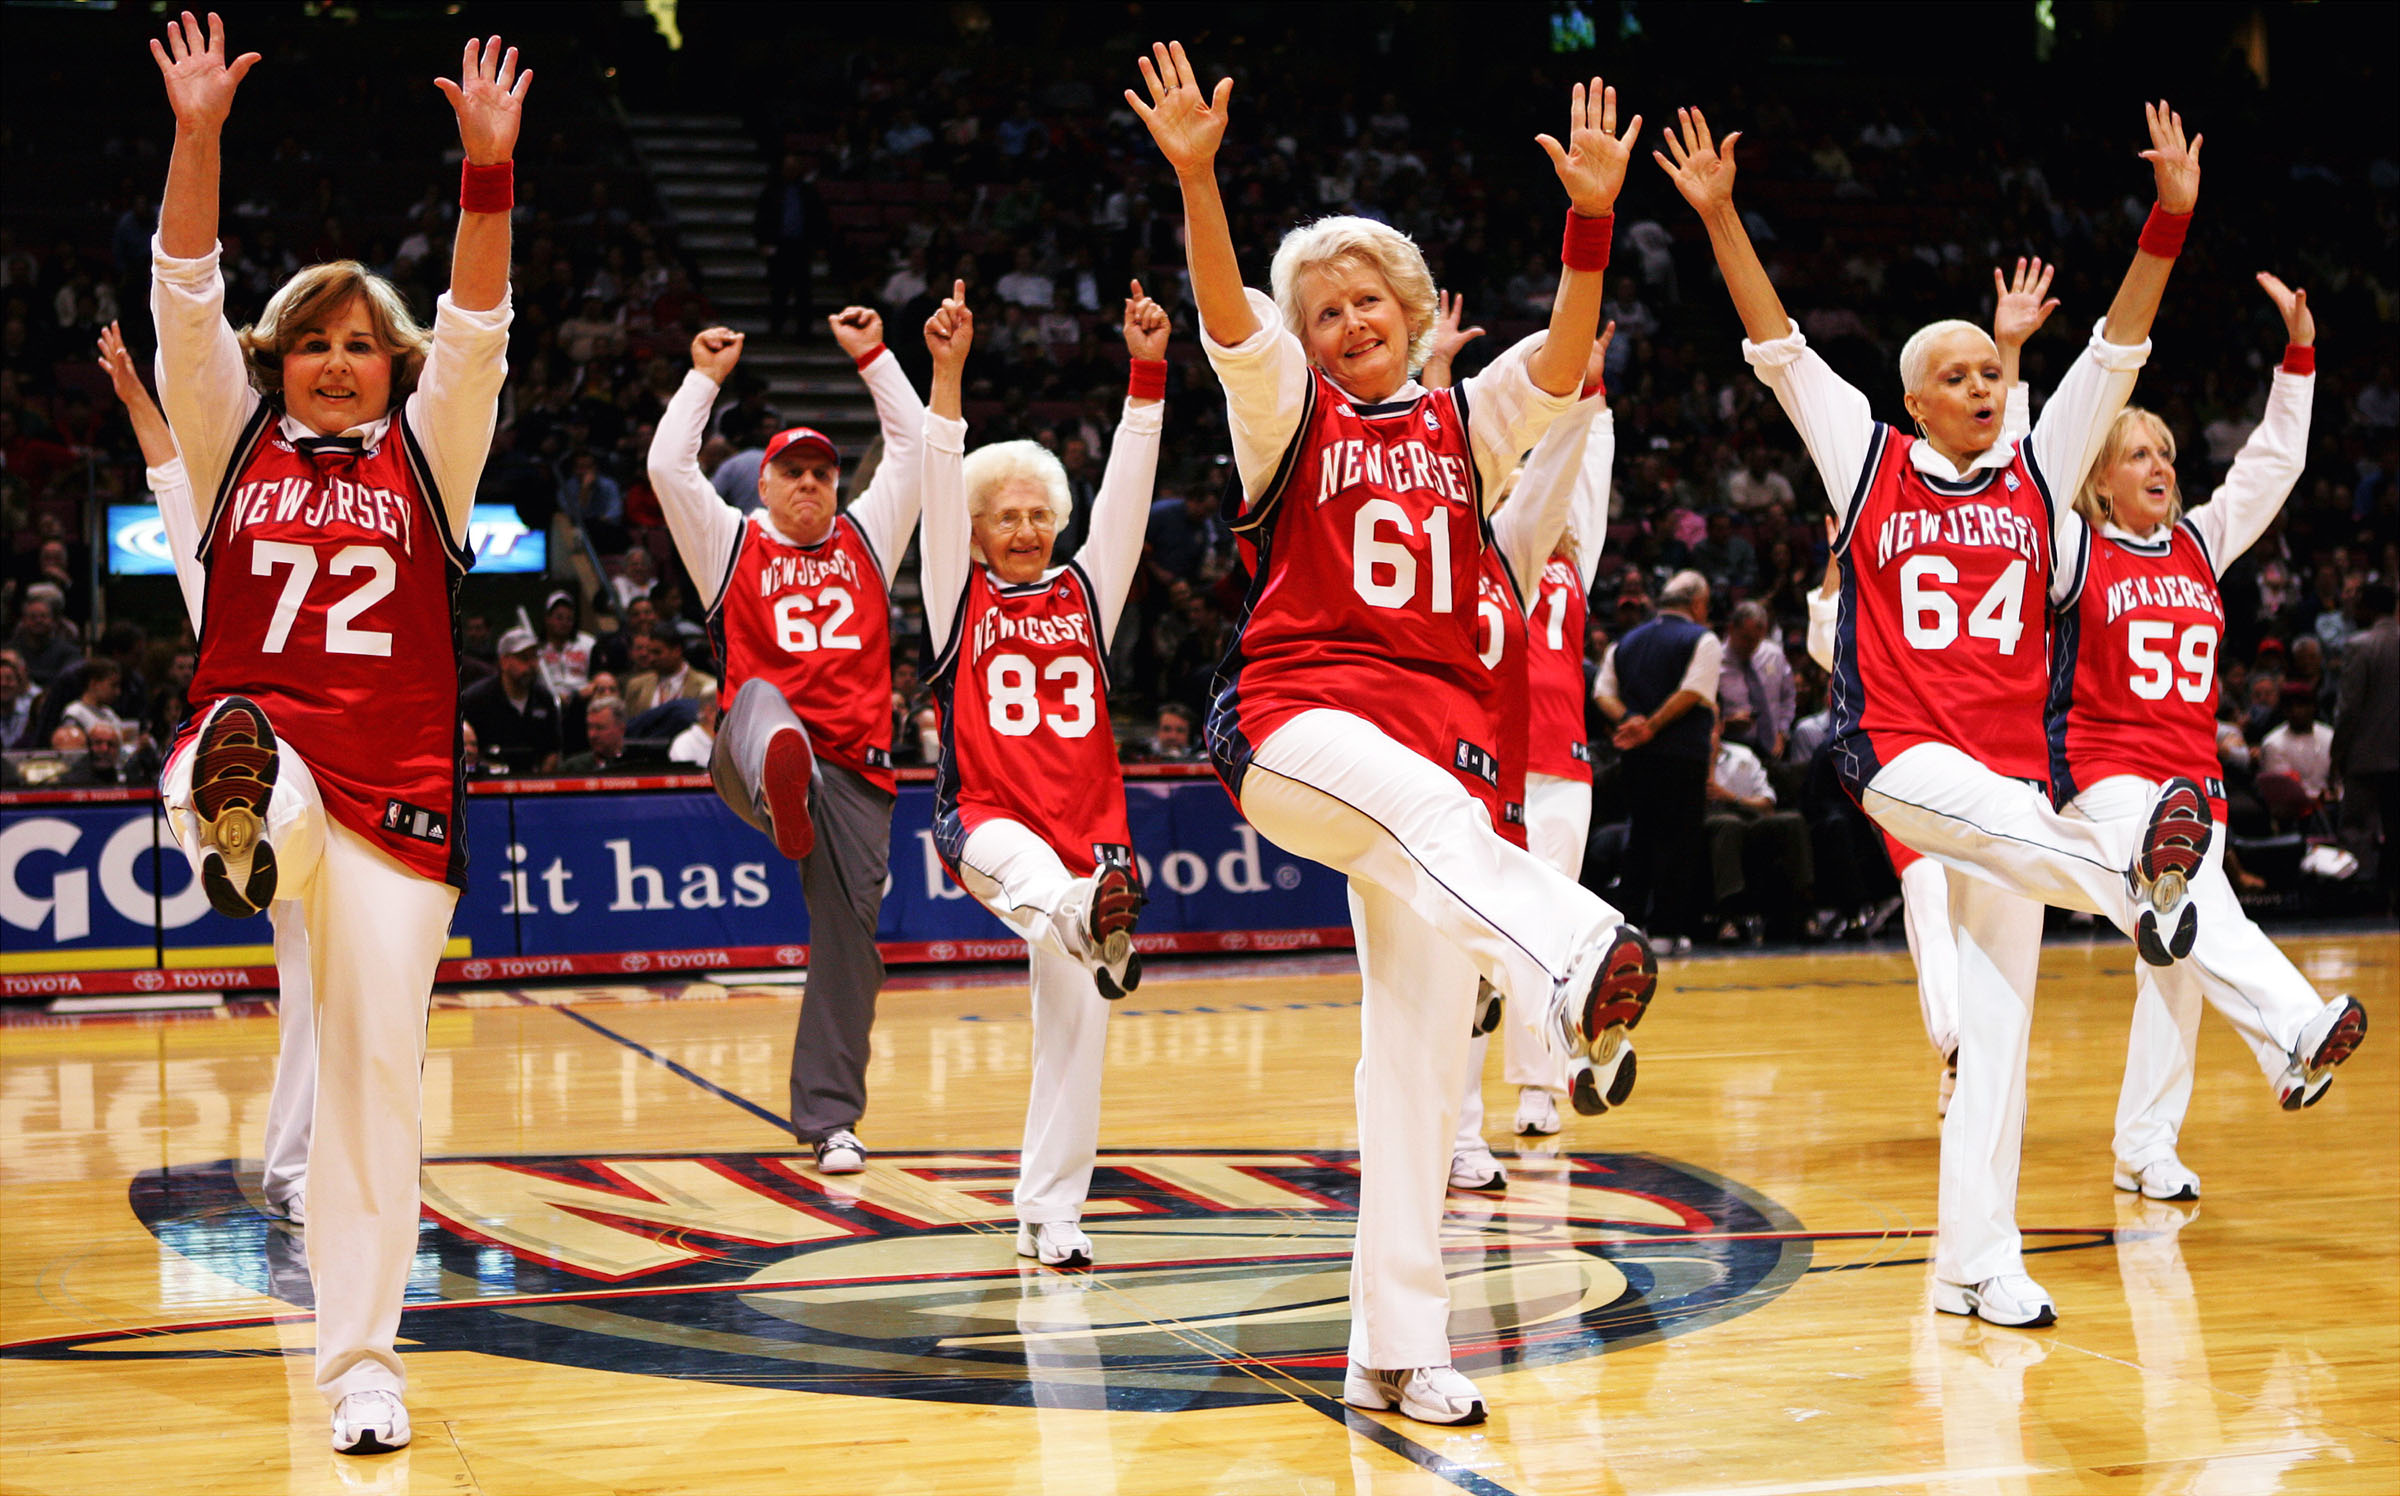 The New Jersey Nets Senior Dancers make their debut at the C